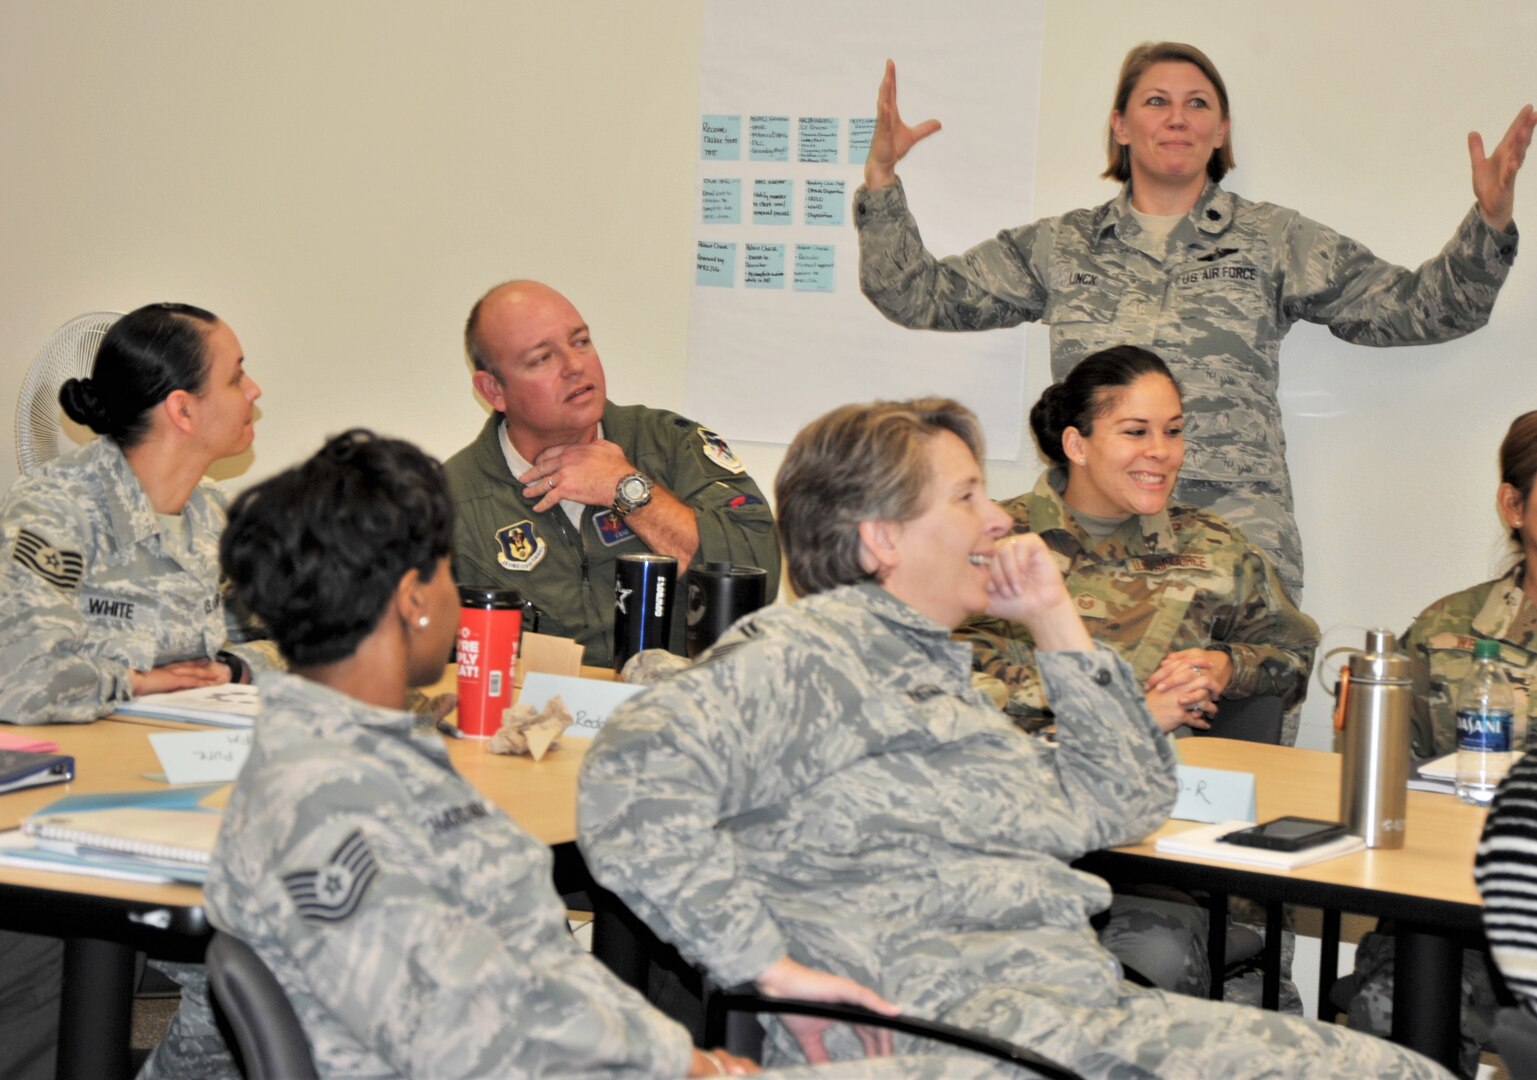 Lt. Col. Sara Linck, 340th Flying Training Group continuous improvement manager, emphasizes a point to group members during the Nov. 19-21 CPI event at Joint Base San Antonio-Randolph, Texas, to address pay issues that occur when Reserve members transition between pay statuses. Other members pictured are (back row left to right) Tech. Sgt. Janina White, Lt. Col. and Lt. Col. Thad Reddick, and Master Sgt. Valerie Valdes, (front row left to right) Tech. Sgt. Ecstacy Hardaway and Senior Master Sgt. Amy Whitman-Rector. (U.S. Air Force photo by Debbie Gildea)